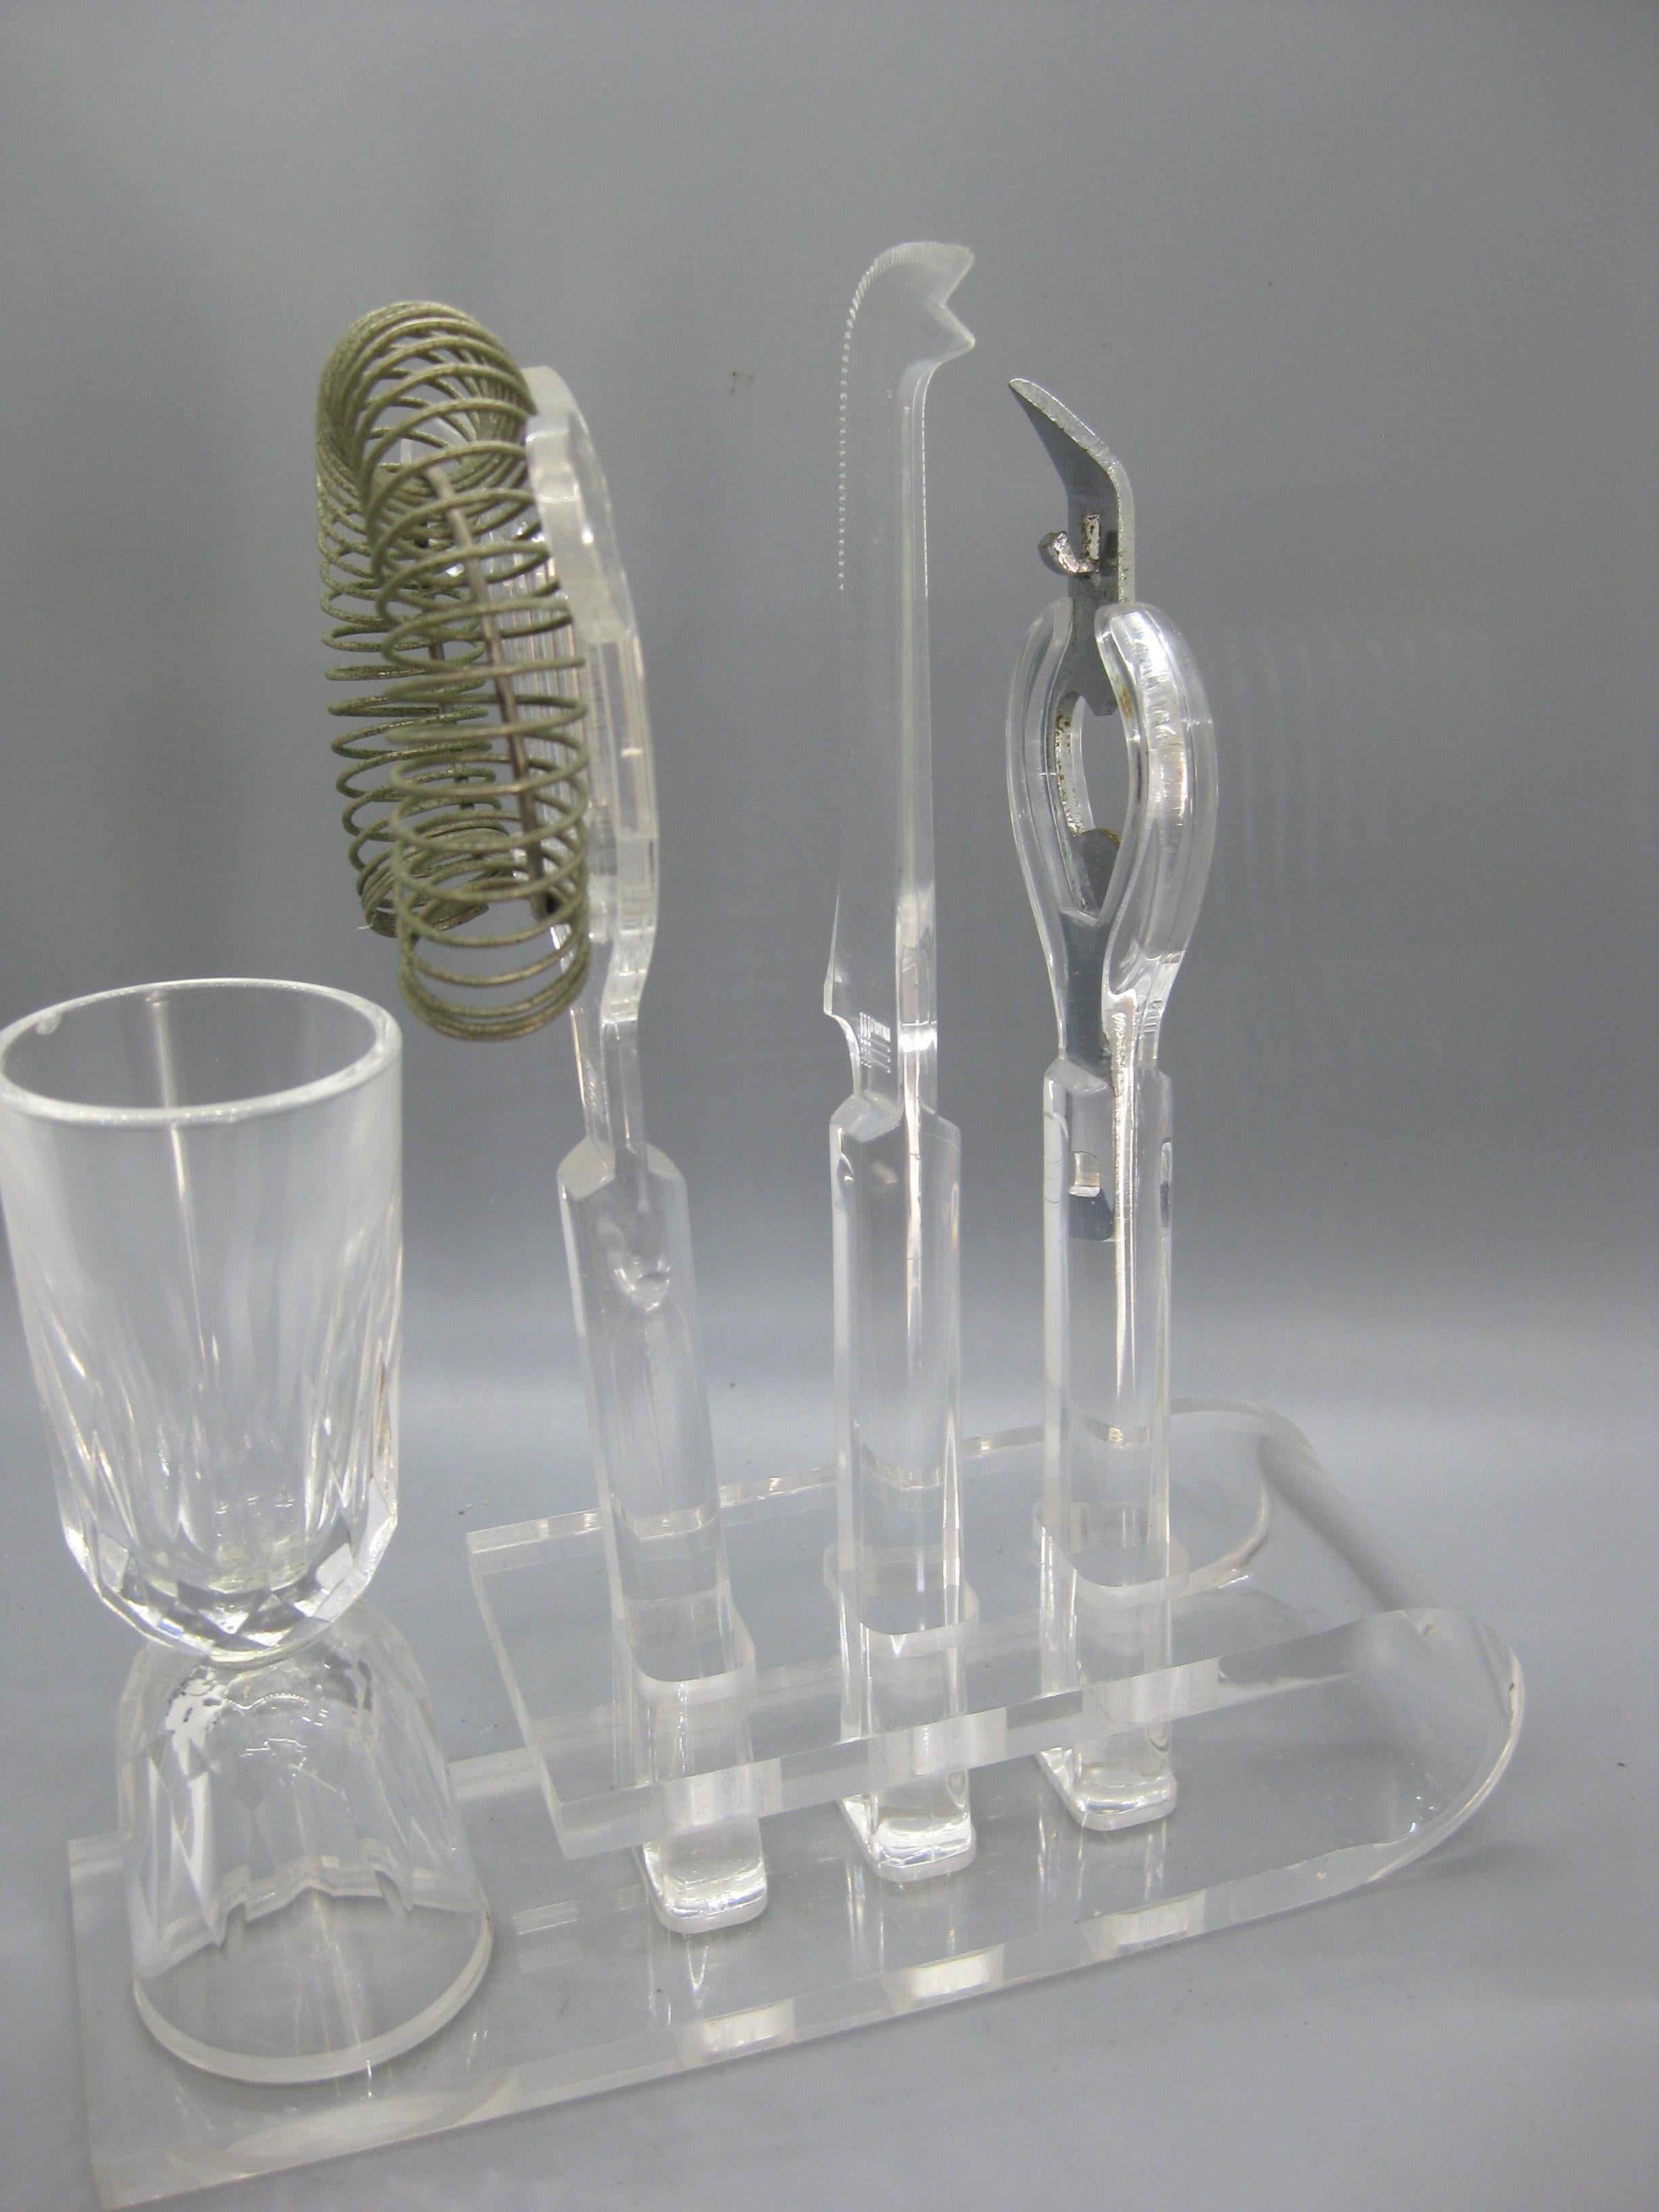 Taiwanese Vintage 1970's Lucite Acrylic Bar Tool Set Barware Serving Pieces w/Caddy For Sale